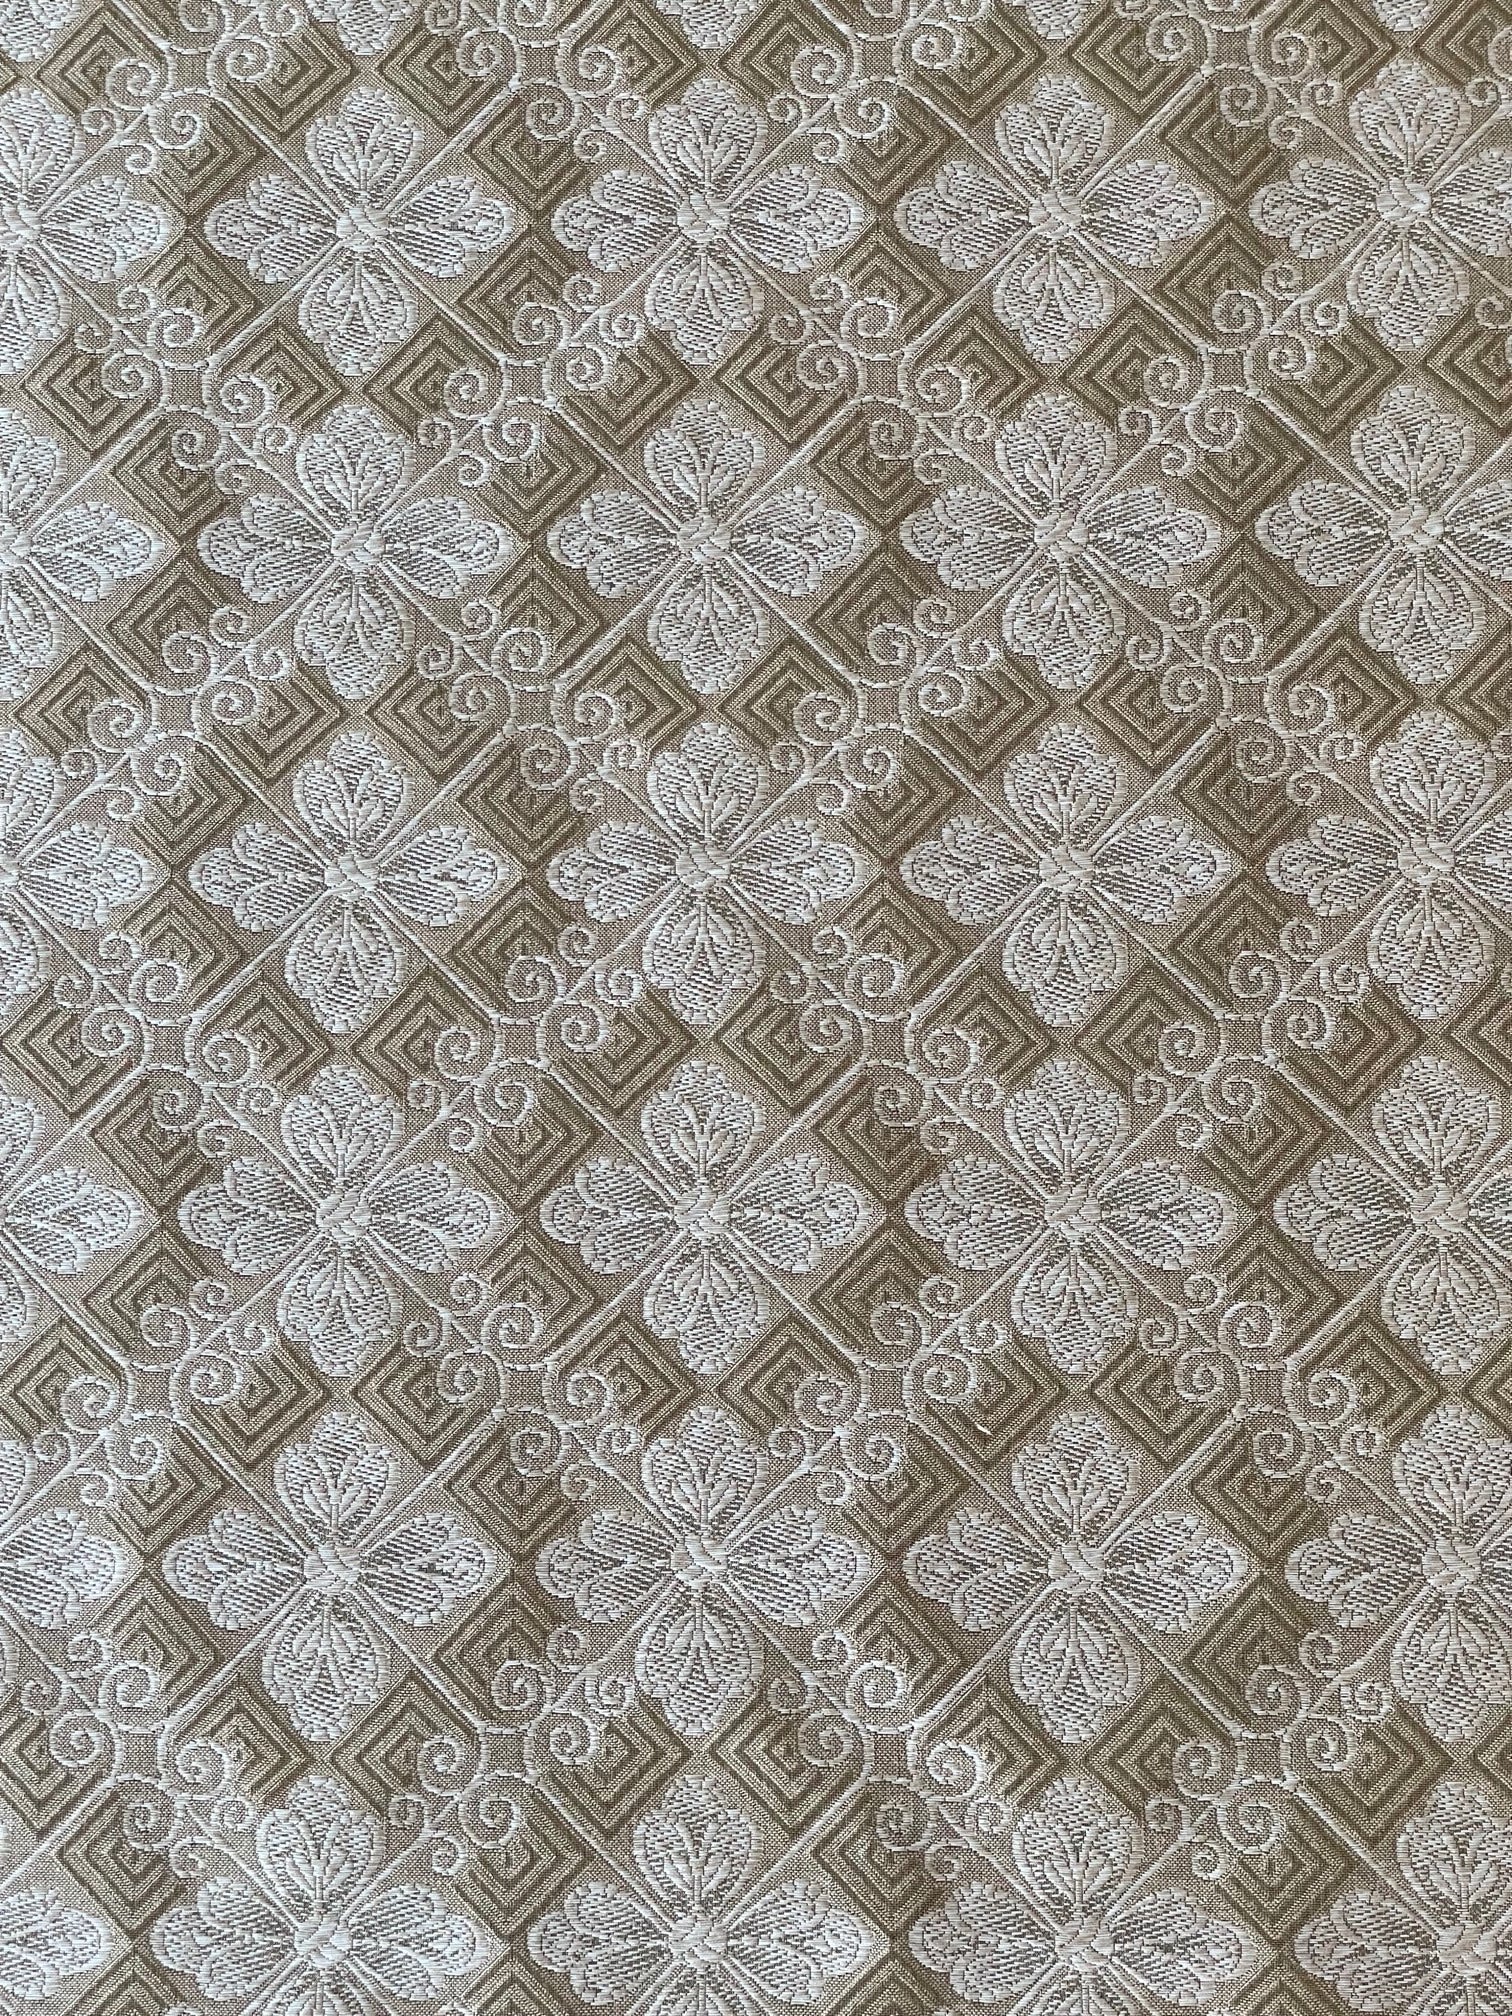 silver and taupe woven fabric with a tiled geometric design